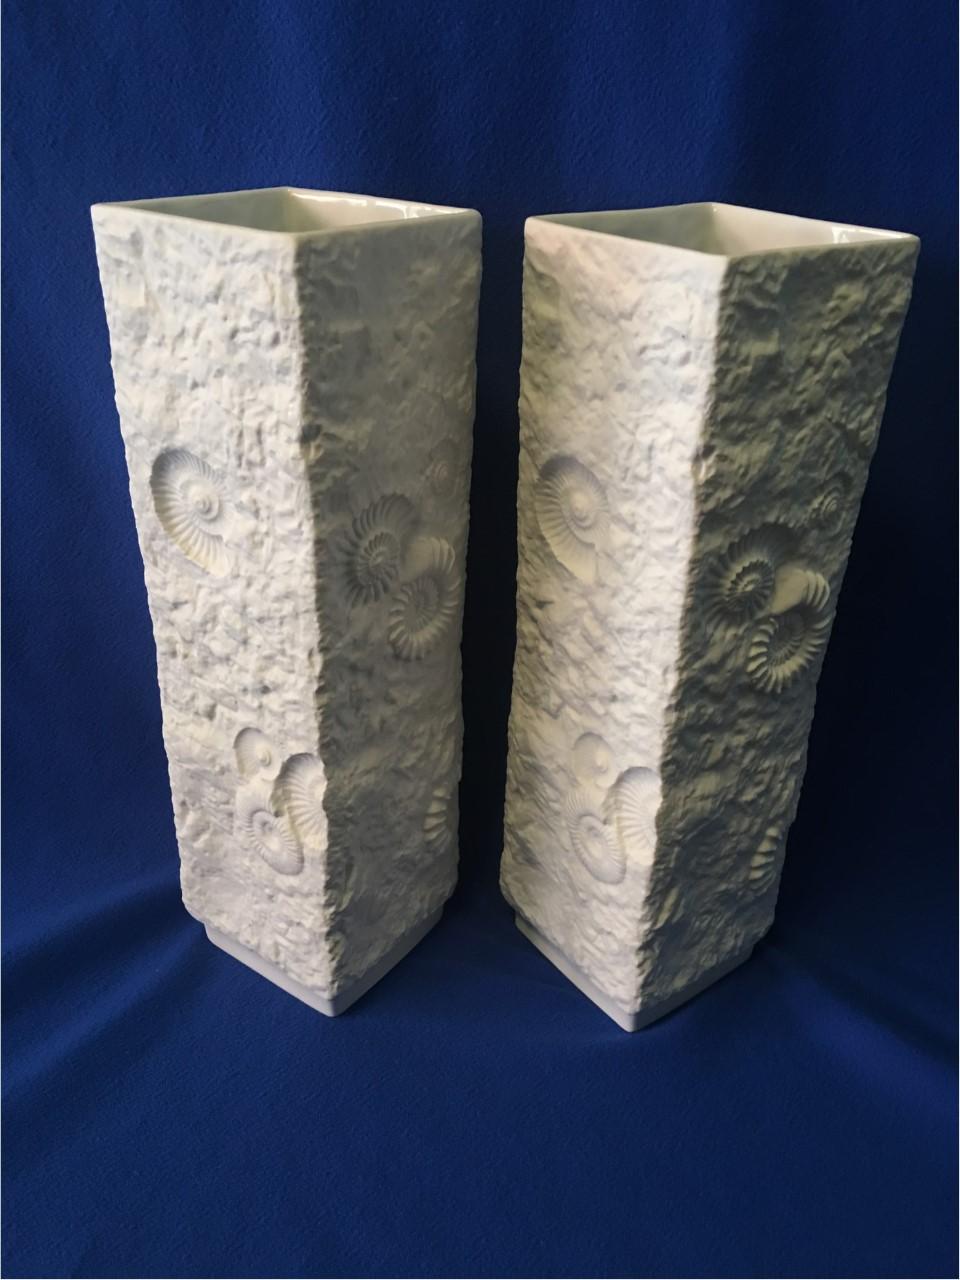 A real eye catching great looking pair of large White Fossil Rock Matte porcelain Vases created by Kaiser of Germany. From the 1970's. They are free of any defects . A lovely addition to any room.